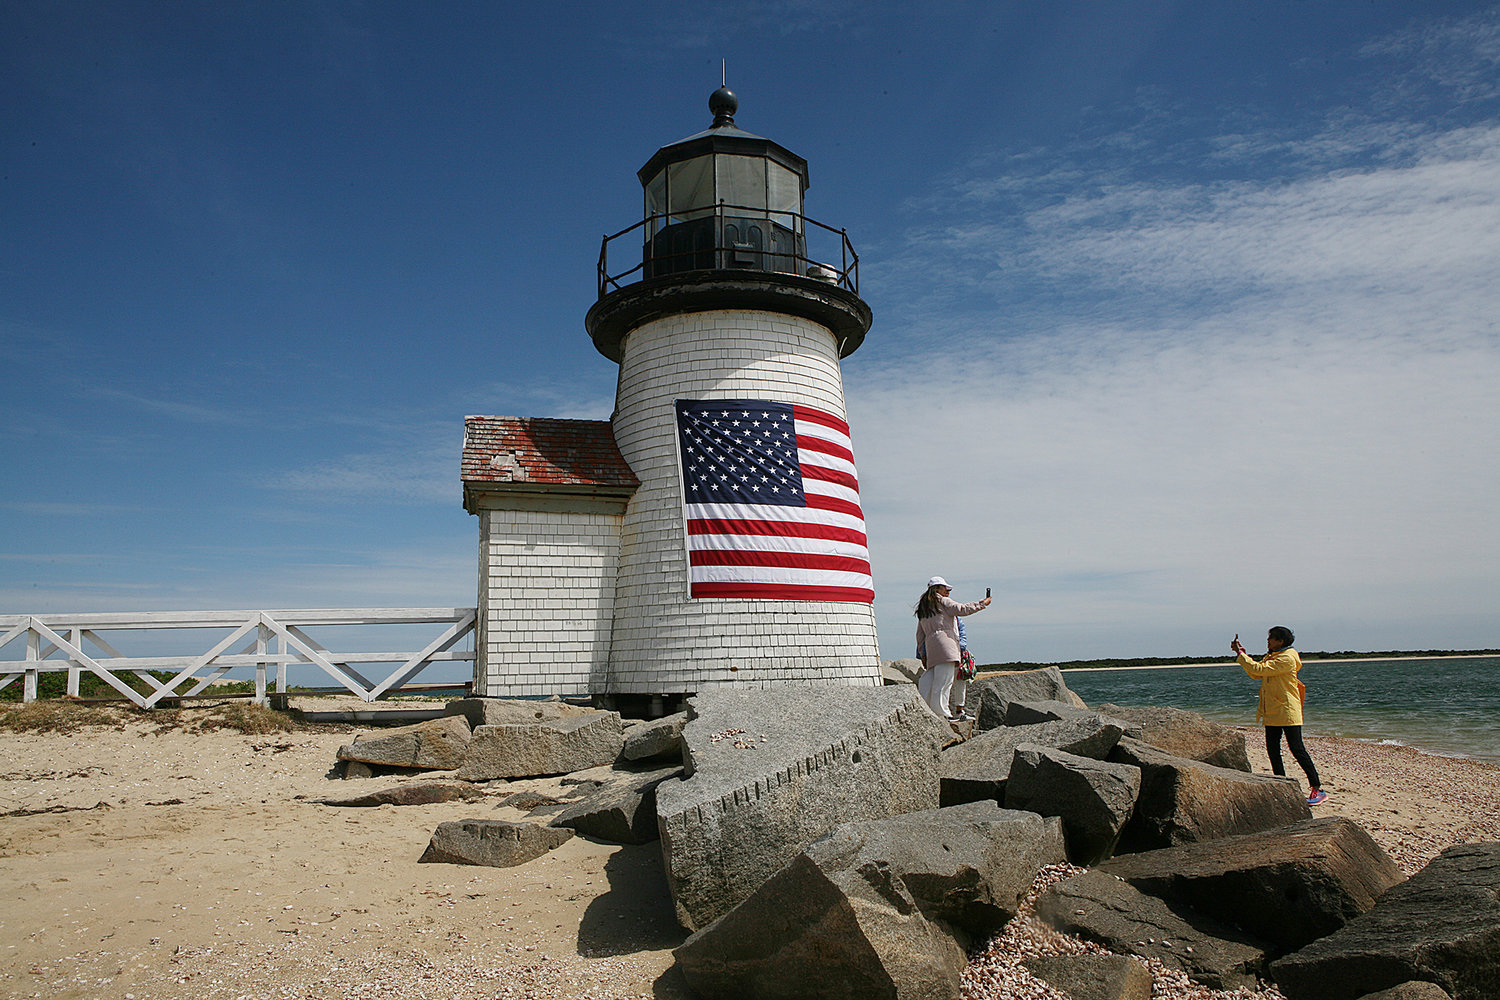 People take photos after a crew from the US Coast Guard Station Brant Point took down the daffodil wreath and replaced it with a flag in honor of Memorial Day and the Fourth of July at the Brant Point lighthouse